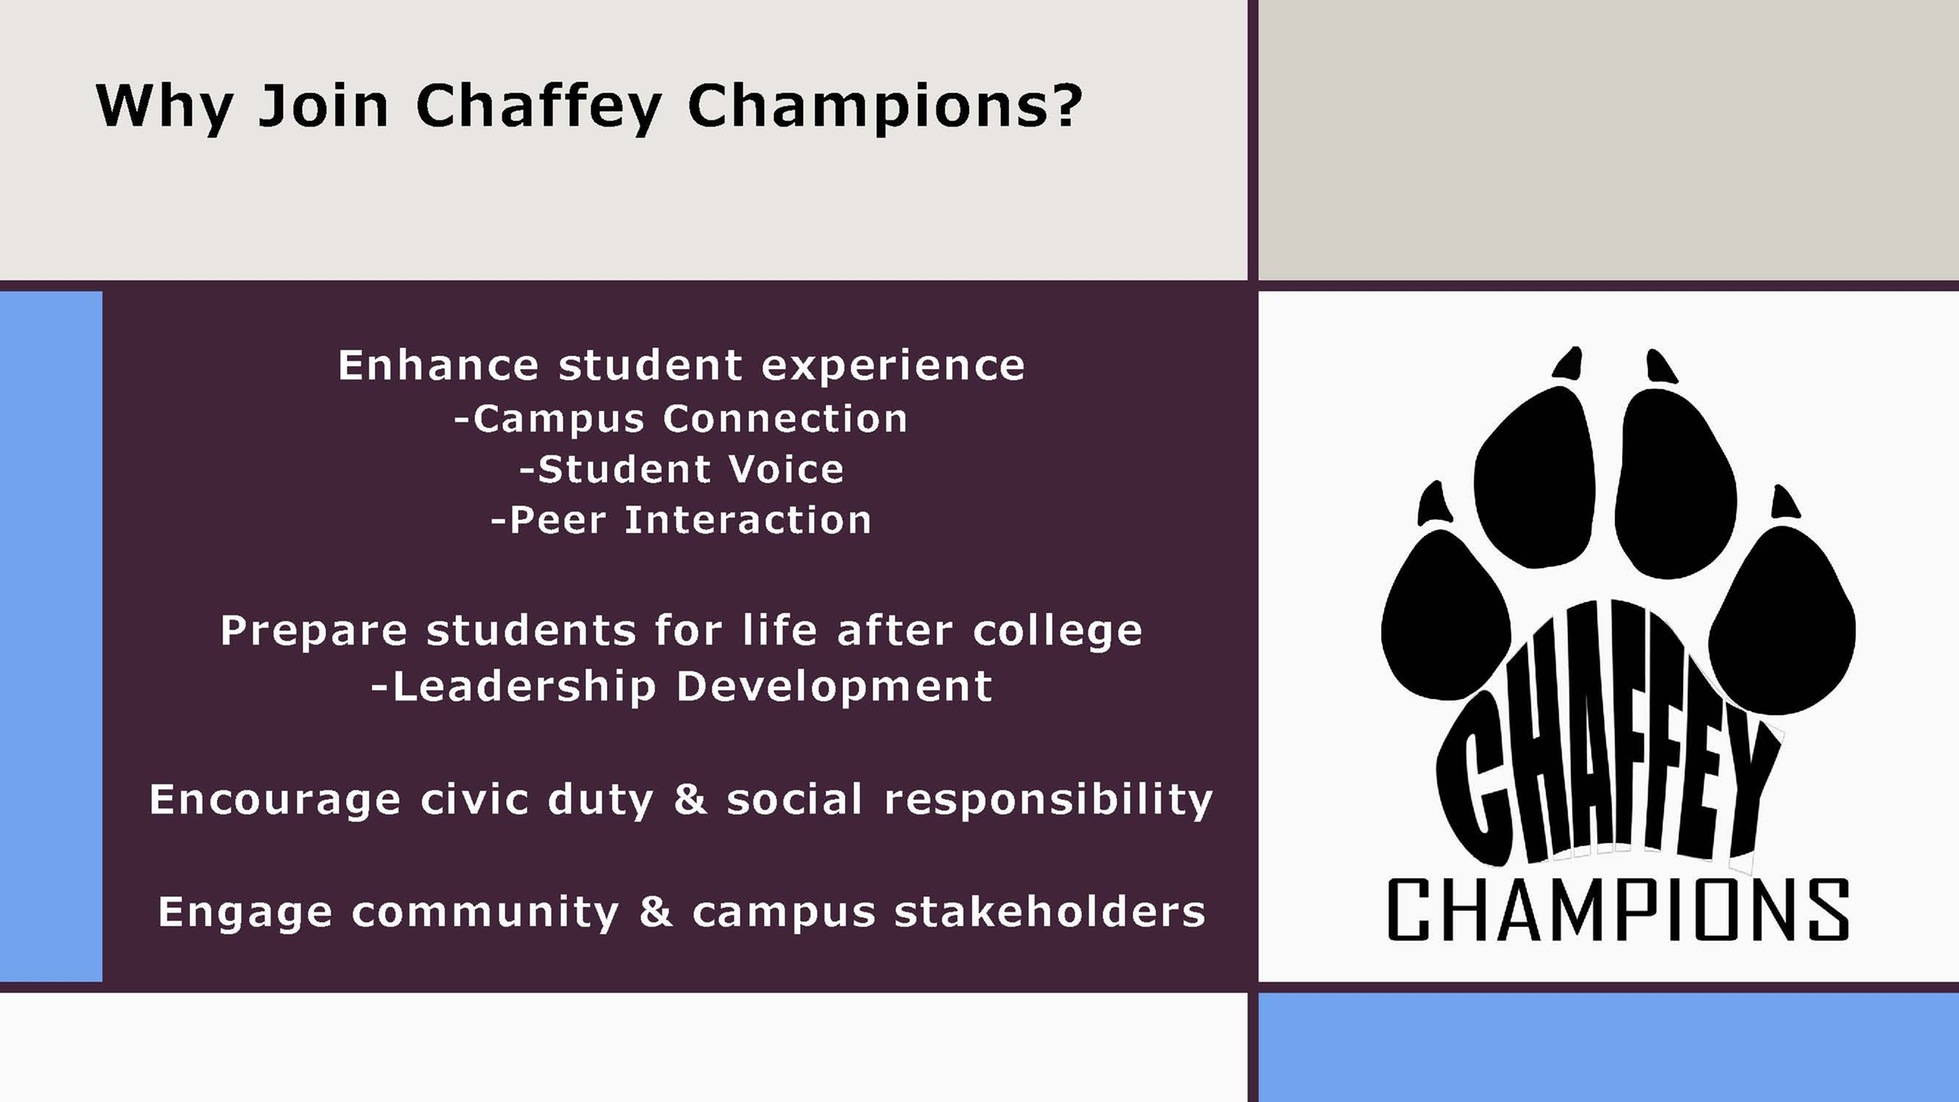 Why Join Chaffey Champions?